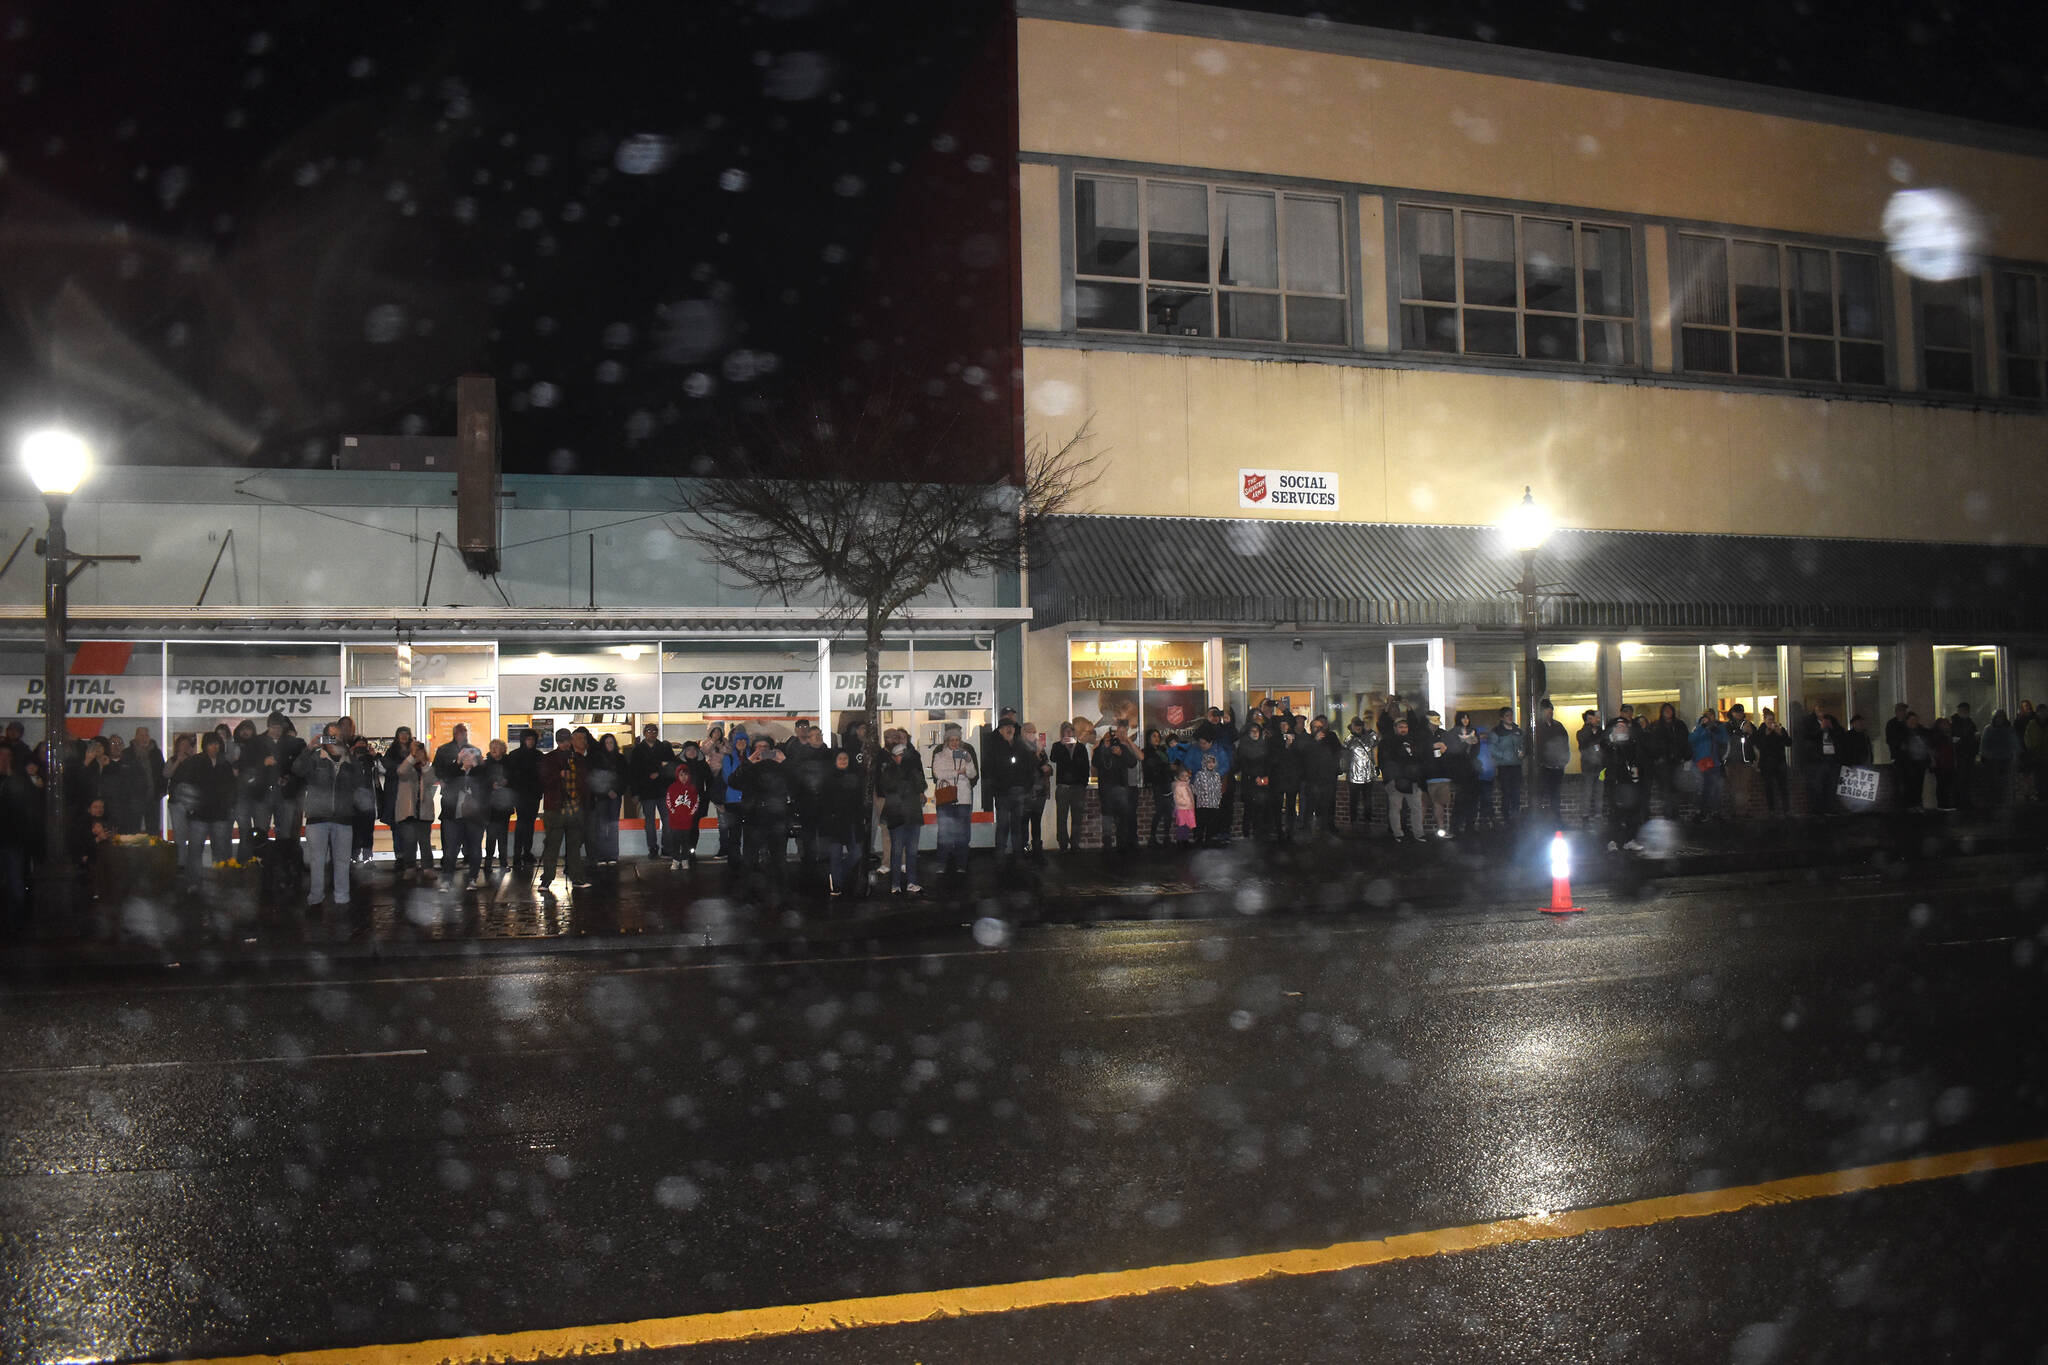 A large crowd — estimated to be at least 200 people — lined the sidewalk between the South K and West Wishkah intersection and the Salvation Army Thrift Store in order to view the lighting of the Side One Building. The building’s owners, with help from Our Aberdeen, hope to bring Nirvana to Aberdeen’s main tourism stage. The attendees, dressed in rain gear and winter jackets because of the wind, rain and cold on Monday night, loved the night’s event. (Matthew N. Wells / The Daily World)